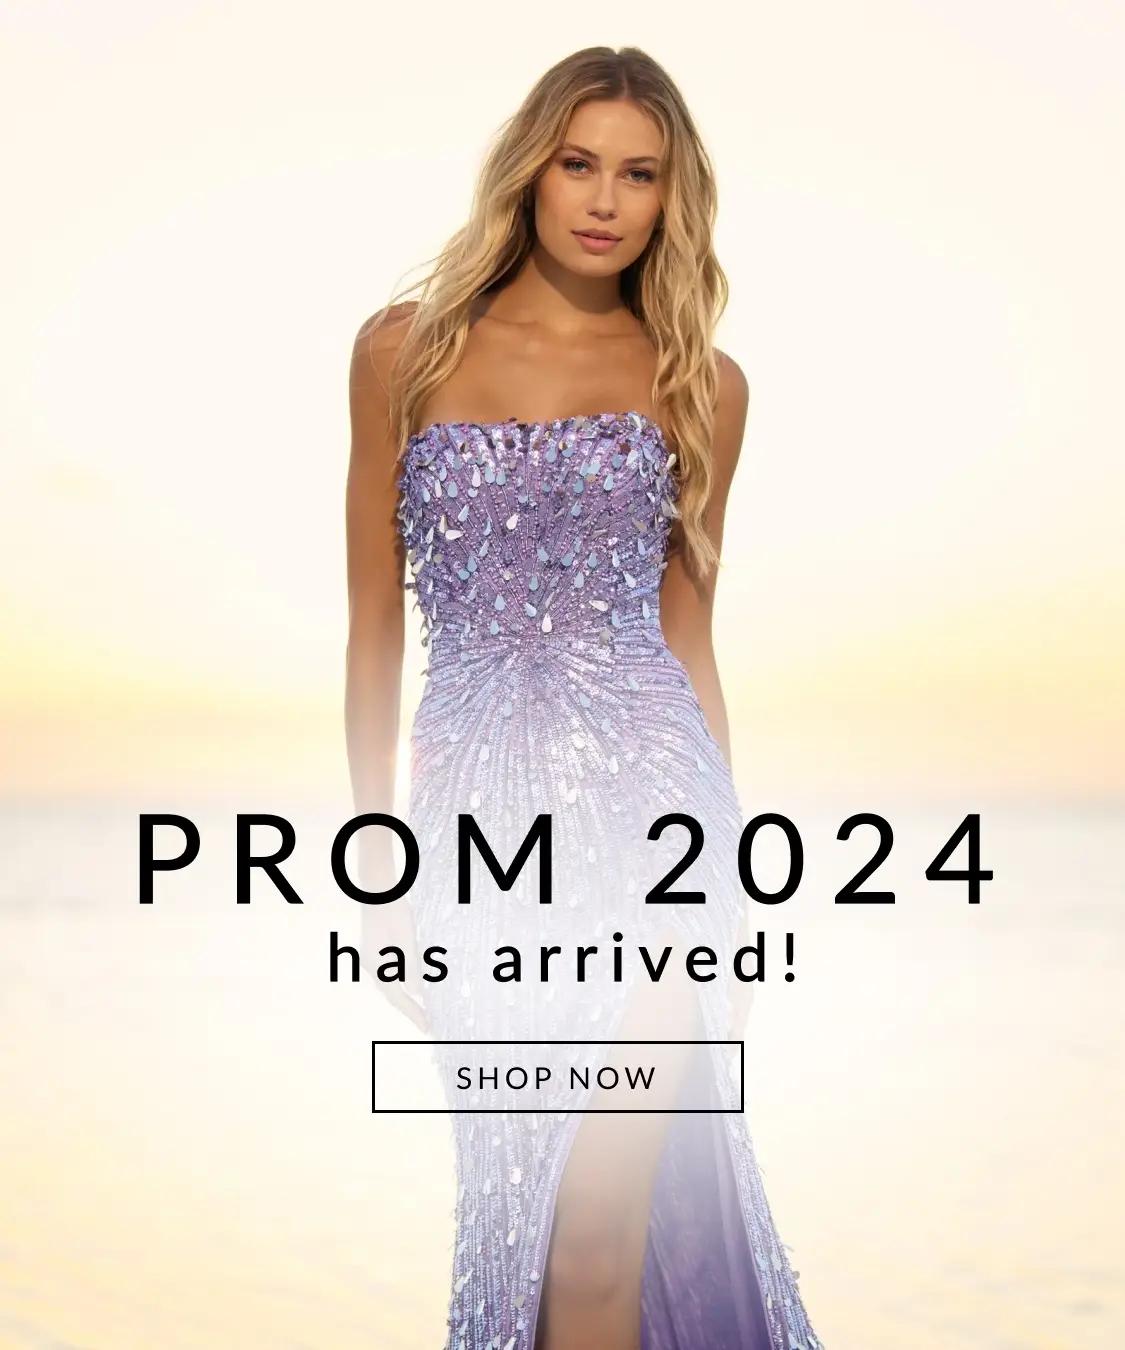 Prom 2024 banner mobile